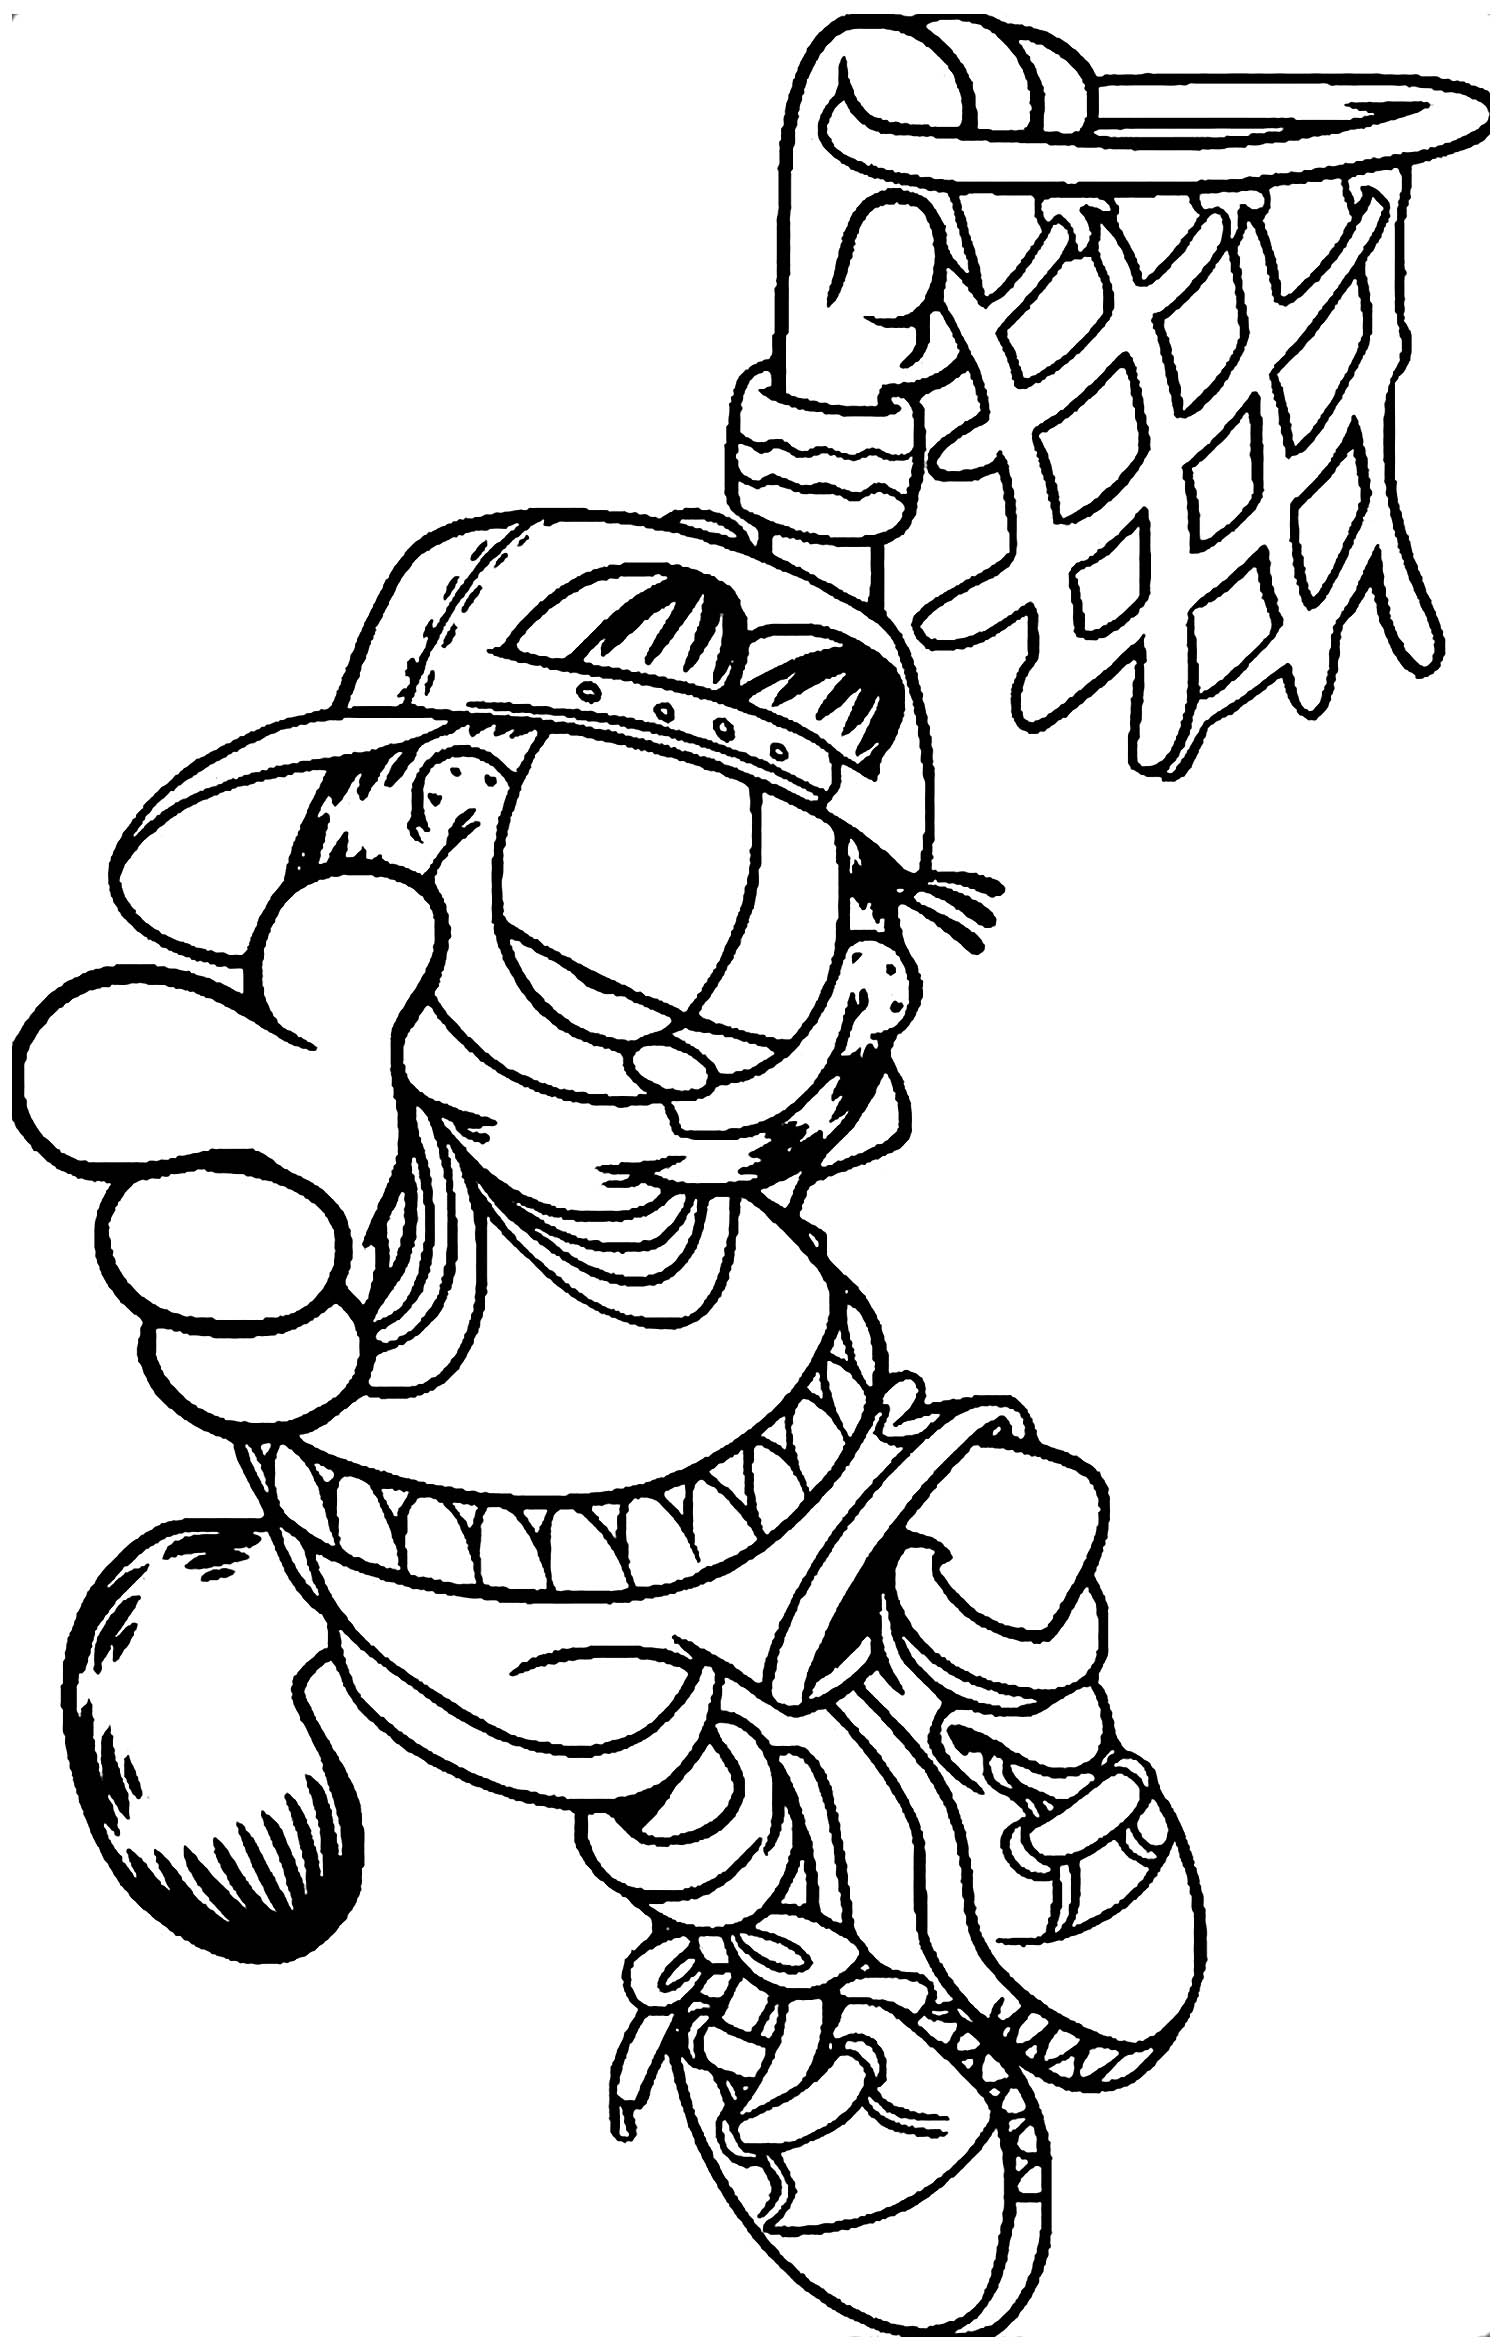 Garfield Playing Basketball Coloring Page